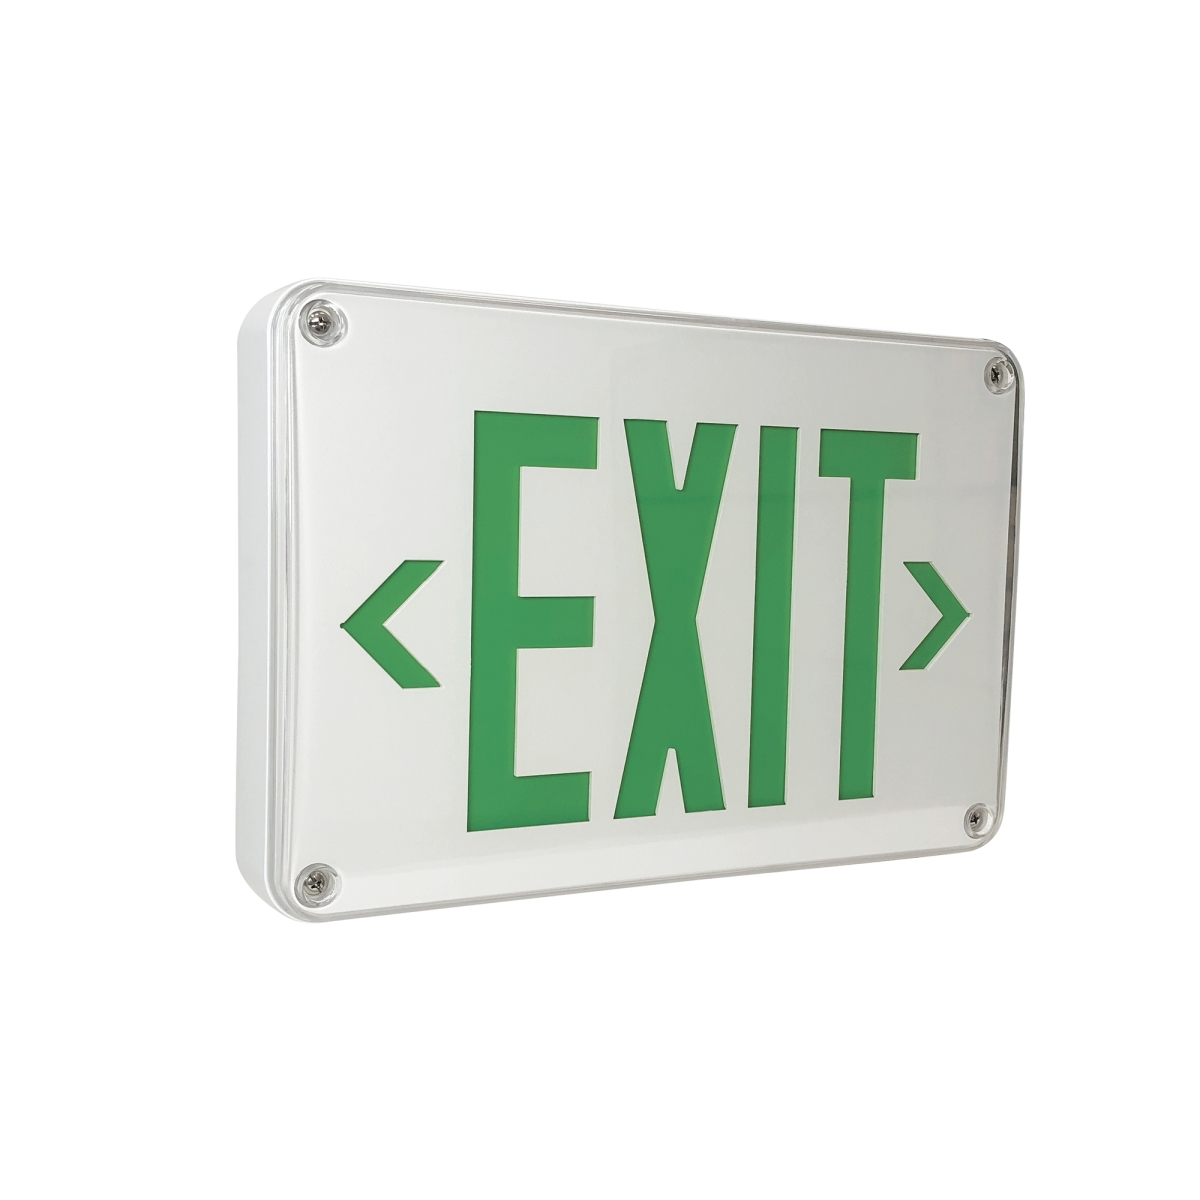 Picture of Nora Lighting NX-617-LED-G LED Self-Diagnostic Wet Location Exit Sign with Battery Backup - White Housing - Green Letters